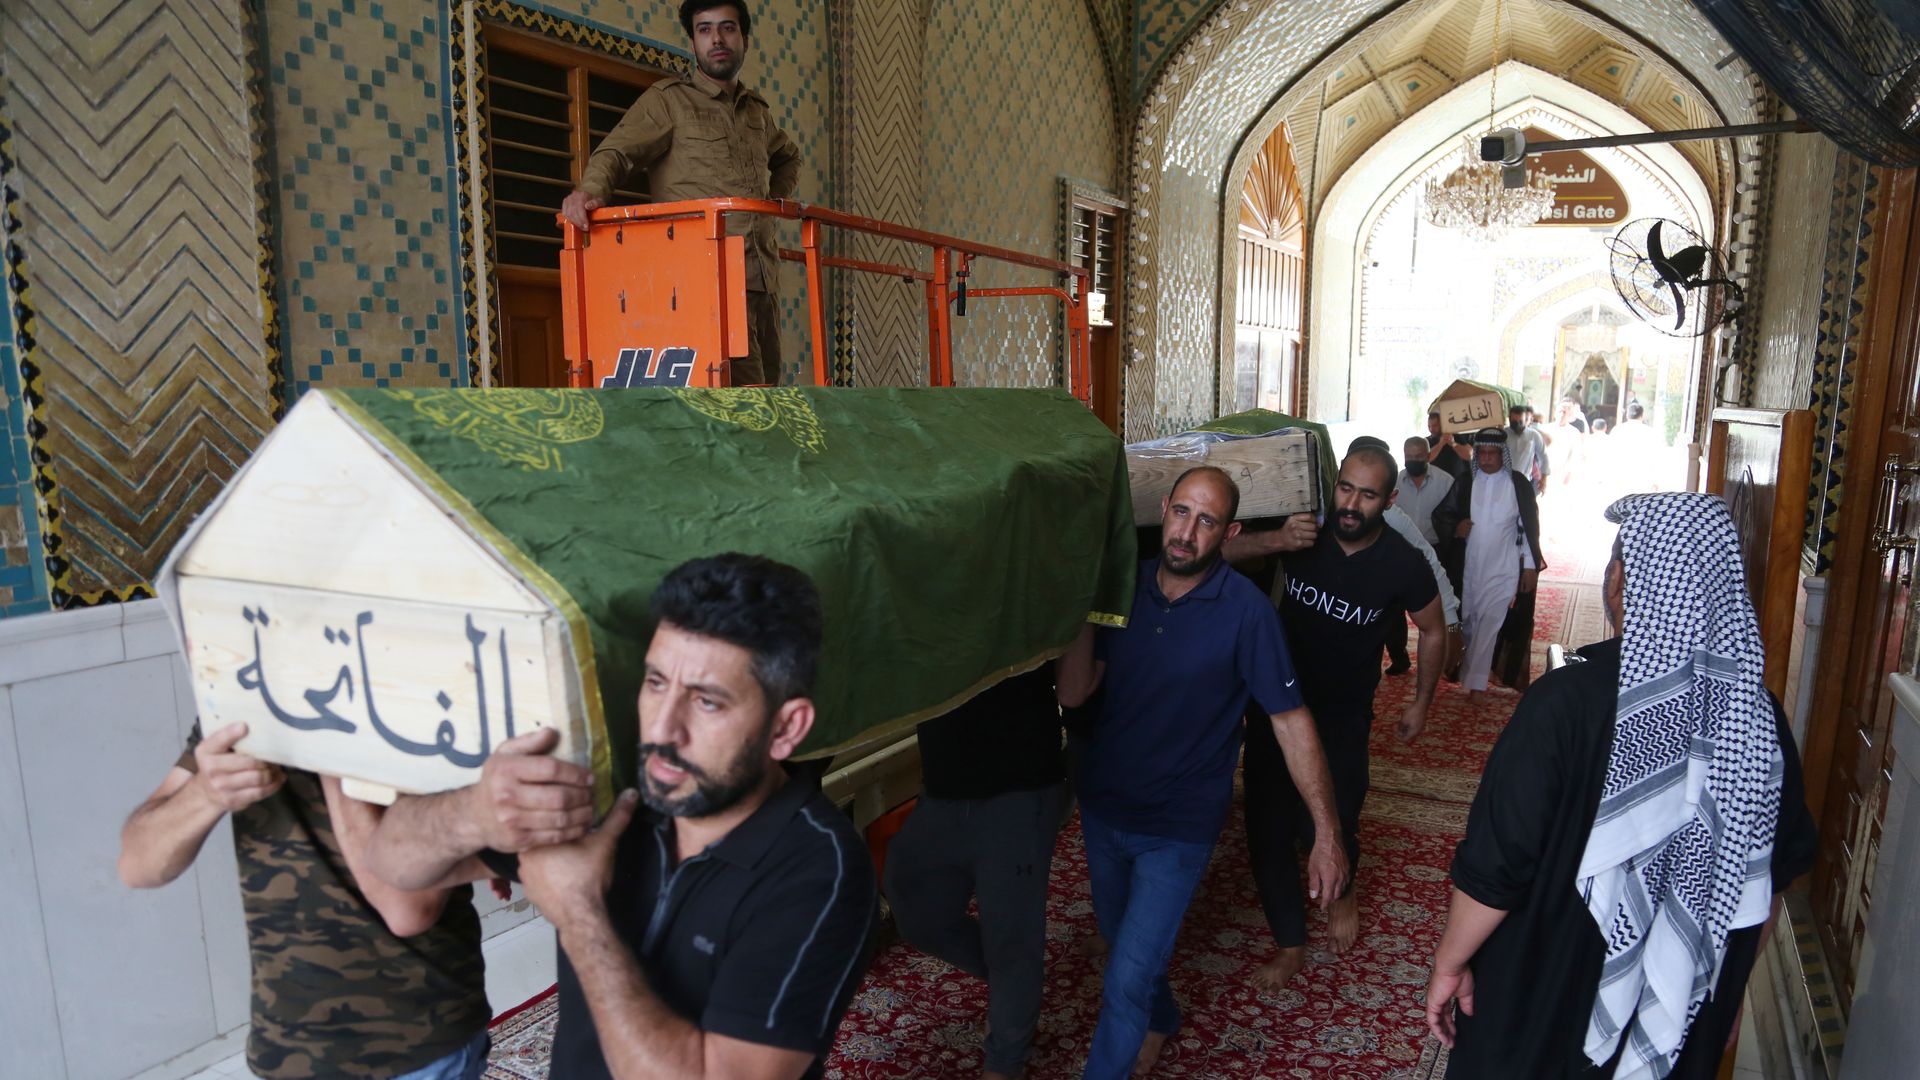 Funeral ceremony held for 3 people who lost their lives at Baghdad Ibn al-Hatip Hospital fire, in Najaf, Iraq on April 25